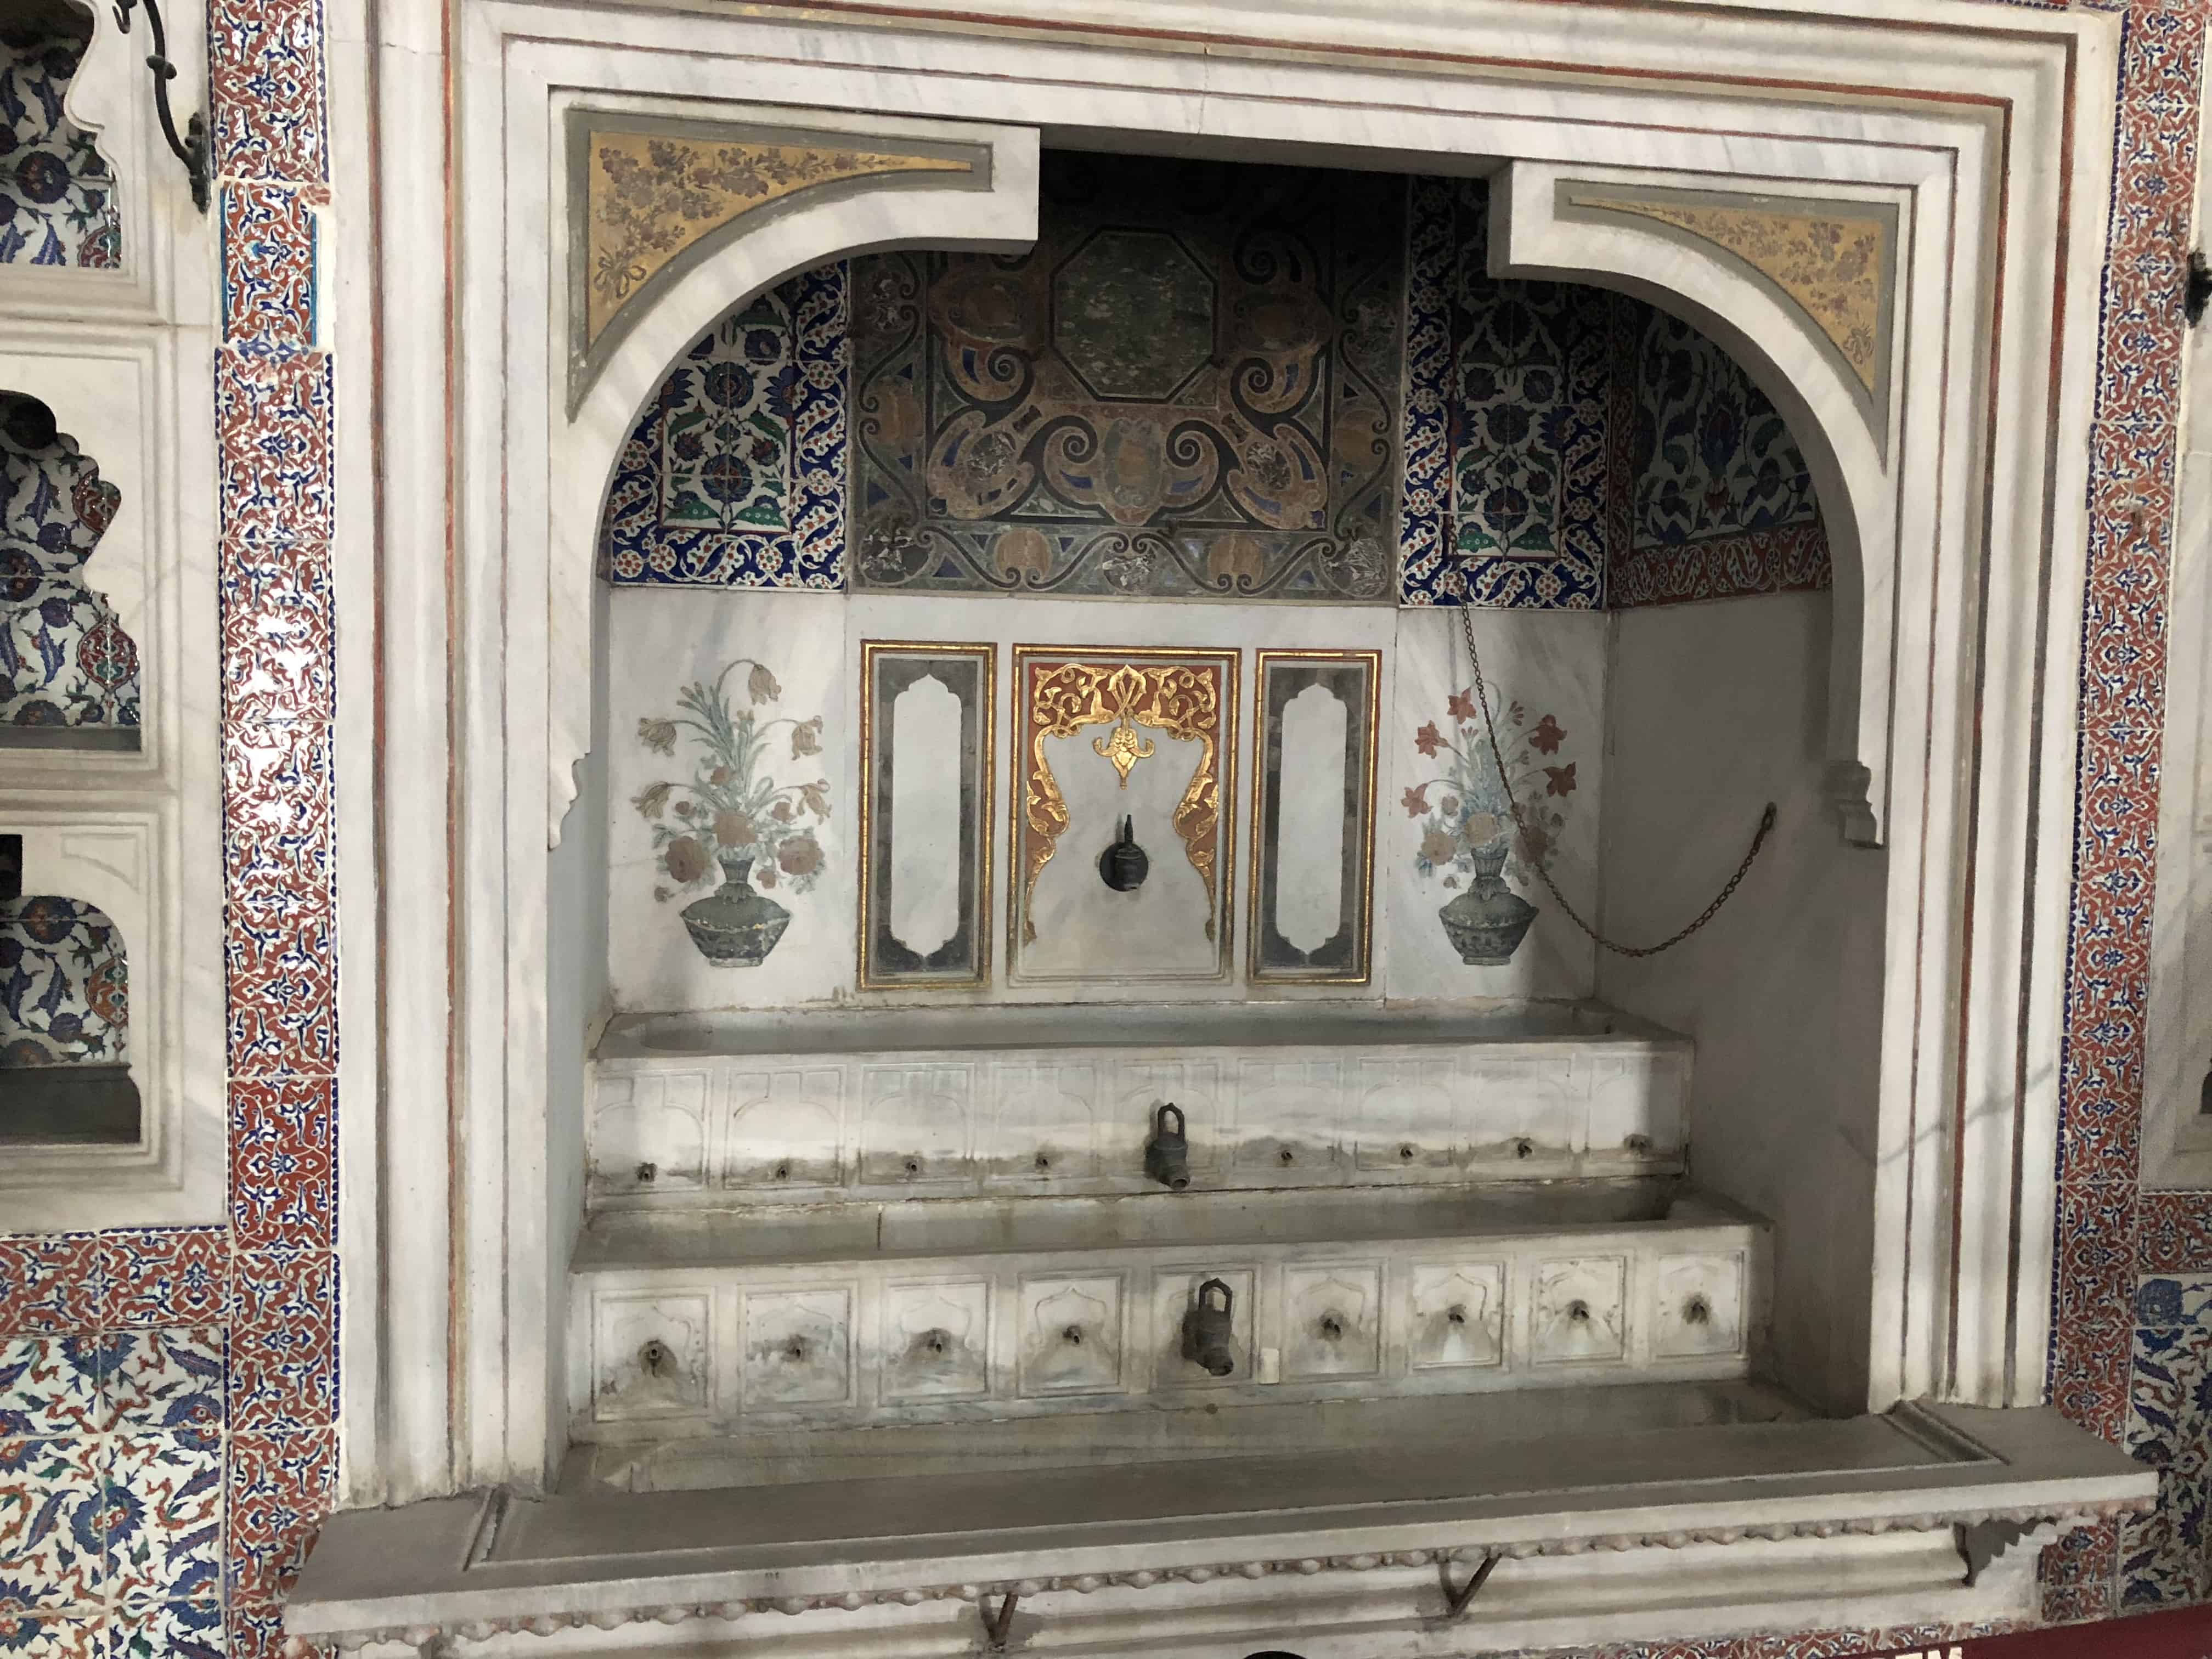 Fountain in the Privy Chamber of Murad III in the Imperial Harem at Topkapi Palace in Istanbul, Turkey